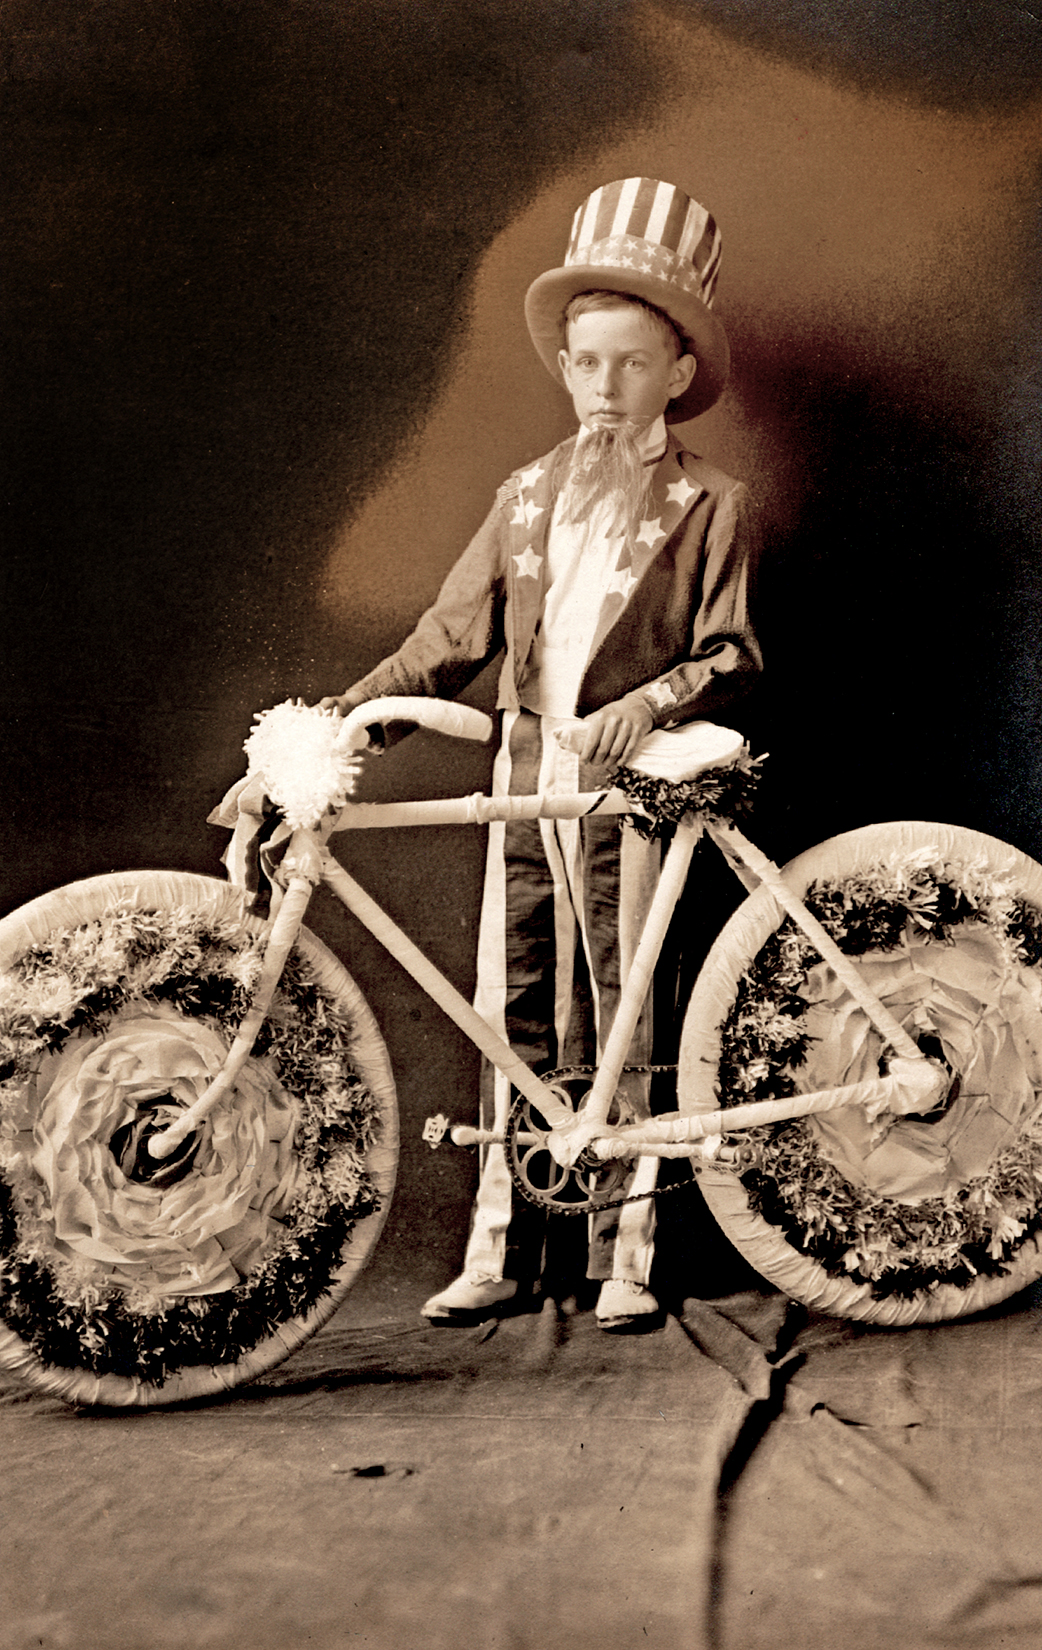 A Social History of the Bicycle as Depicted on Real Photo Post